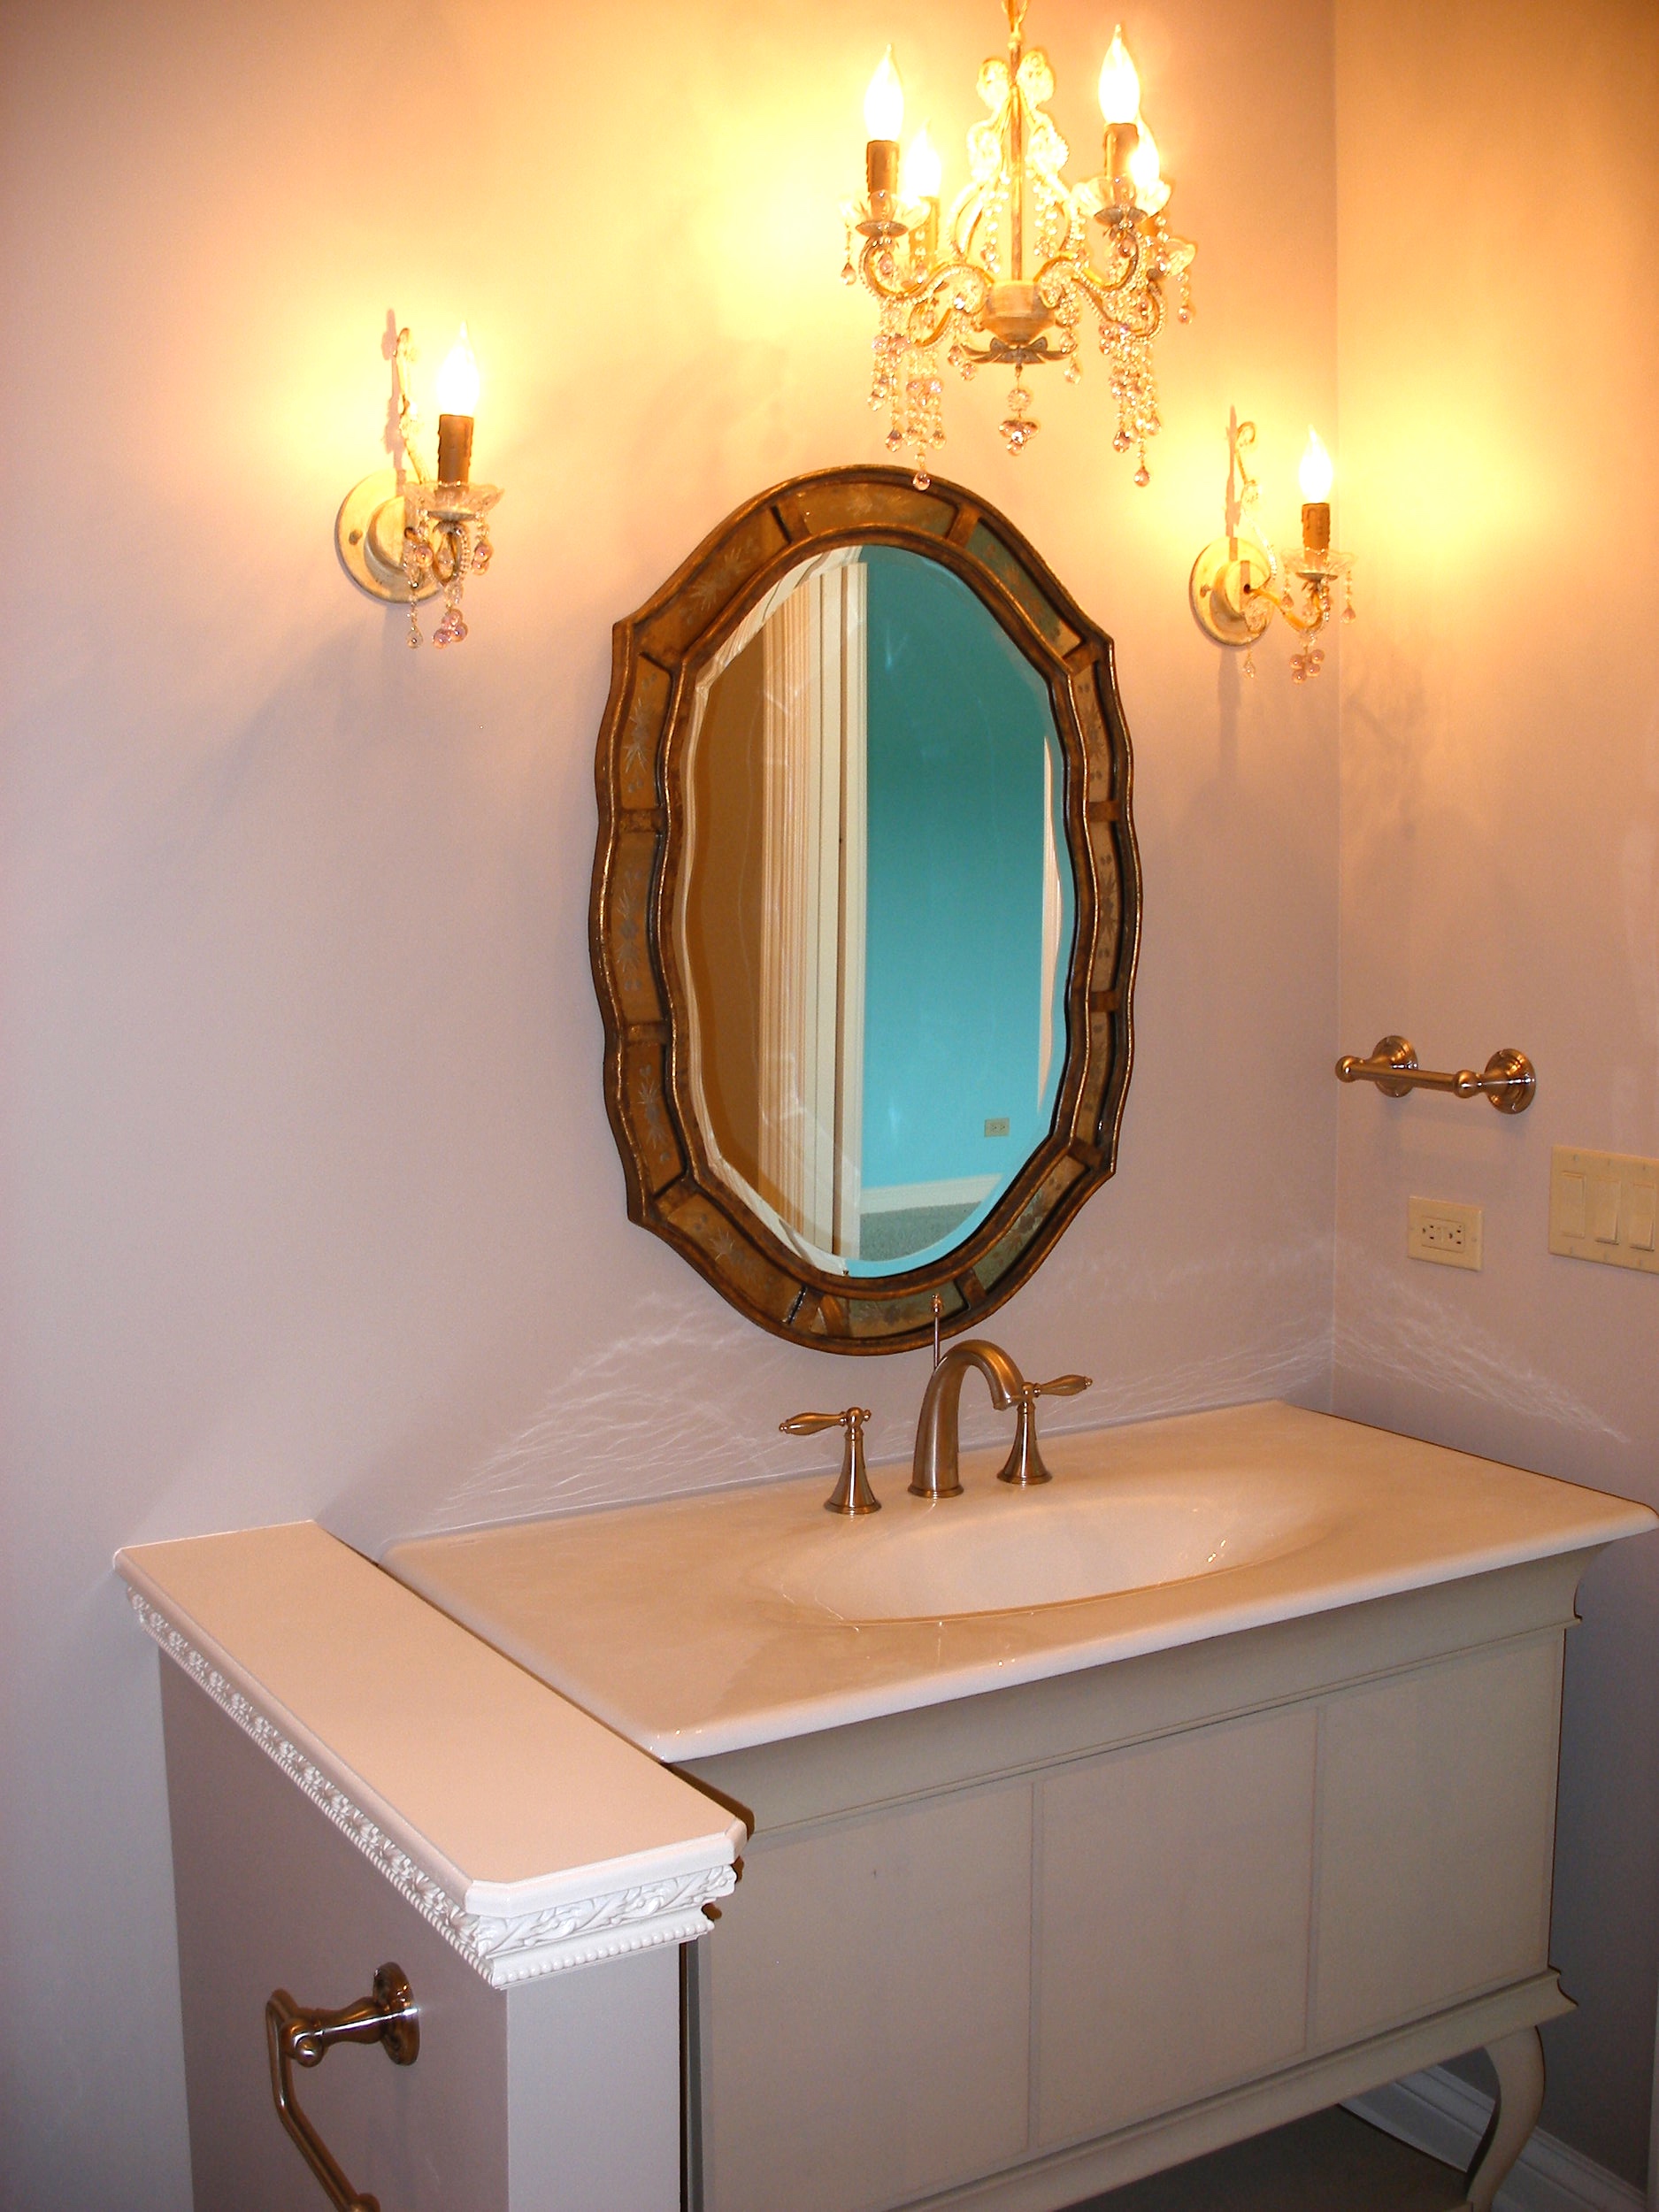 SCONCES ON SIDES OF MIRROR IN ST. CHARLES IL BATH REMODEL 